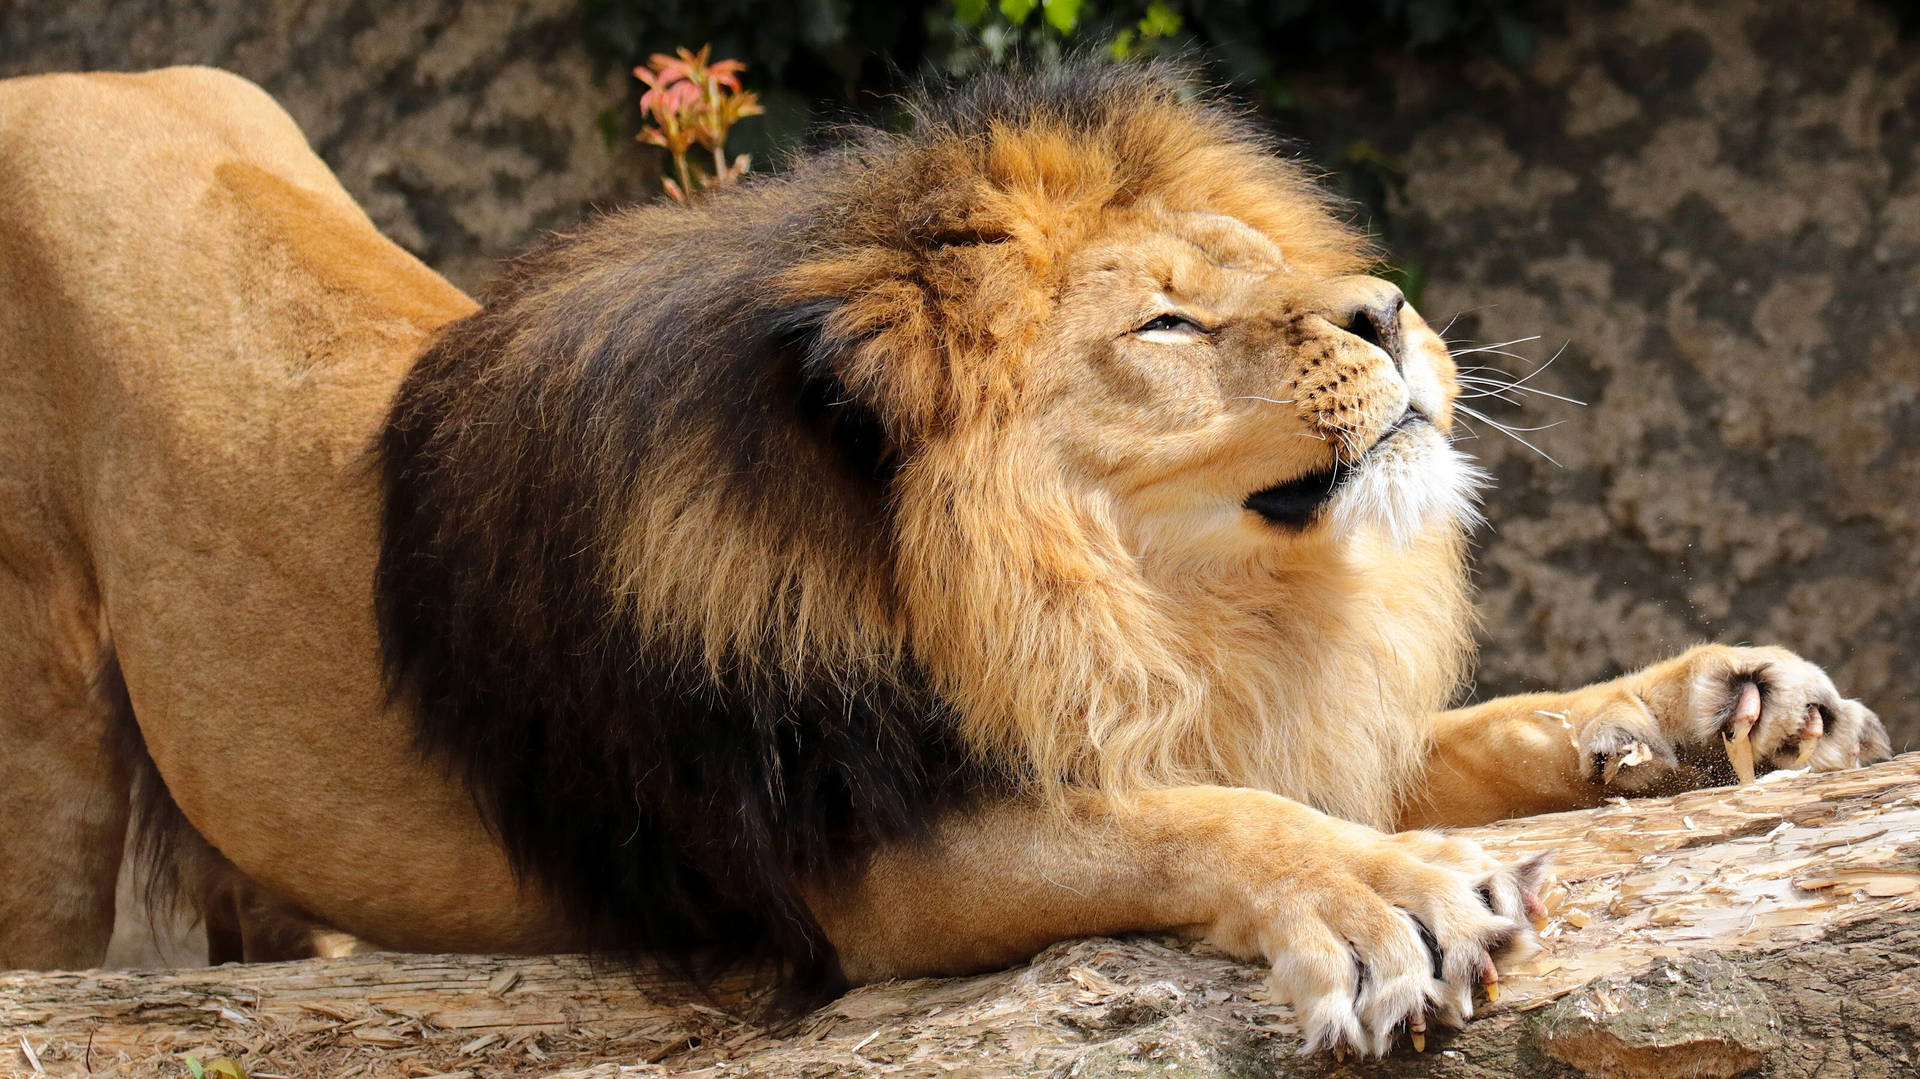 A Magnificent Lion Taking a Moment to Stretch Out Wallpaper